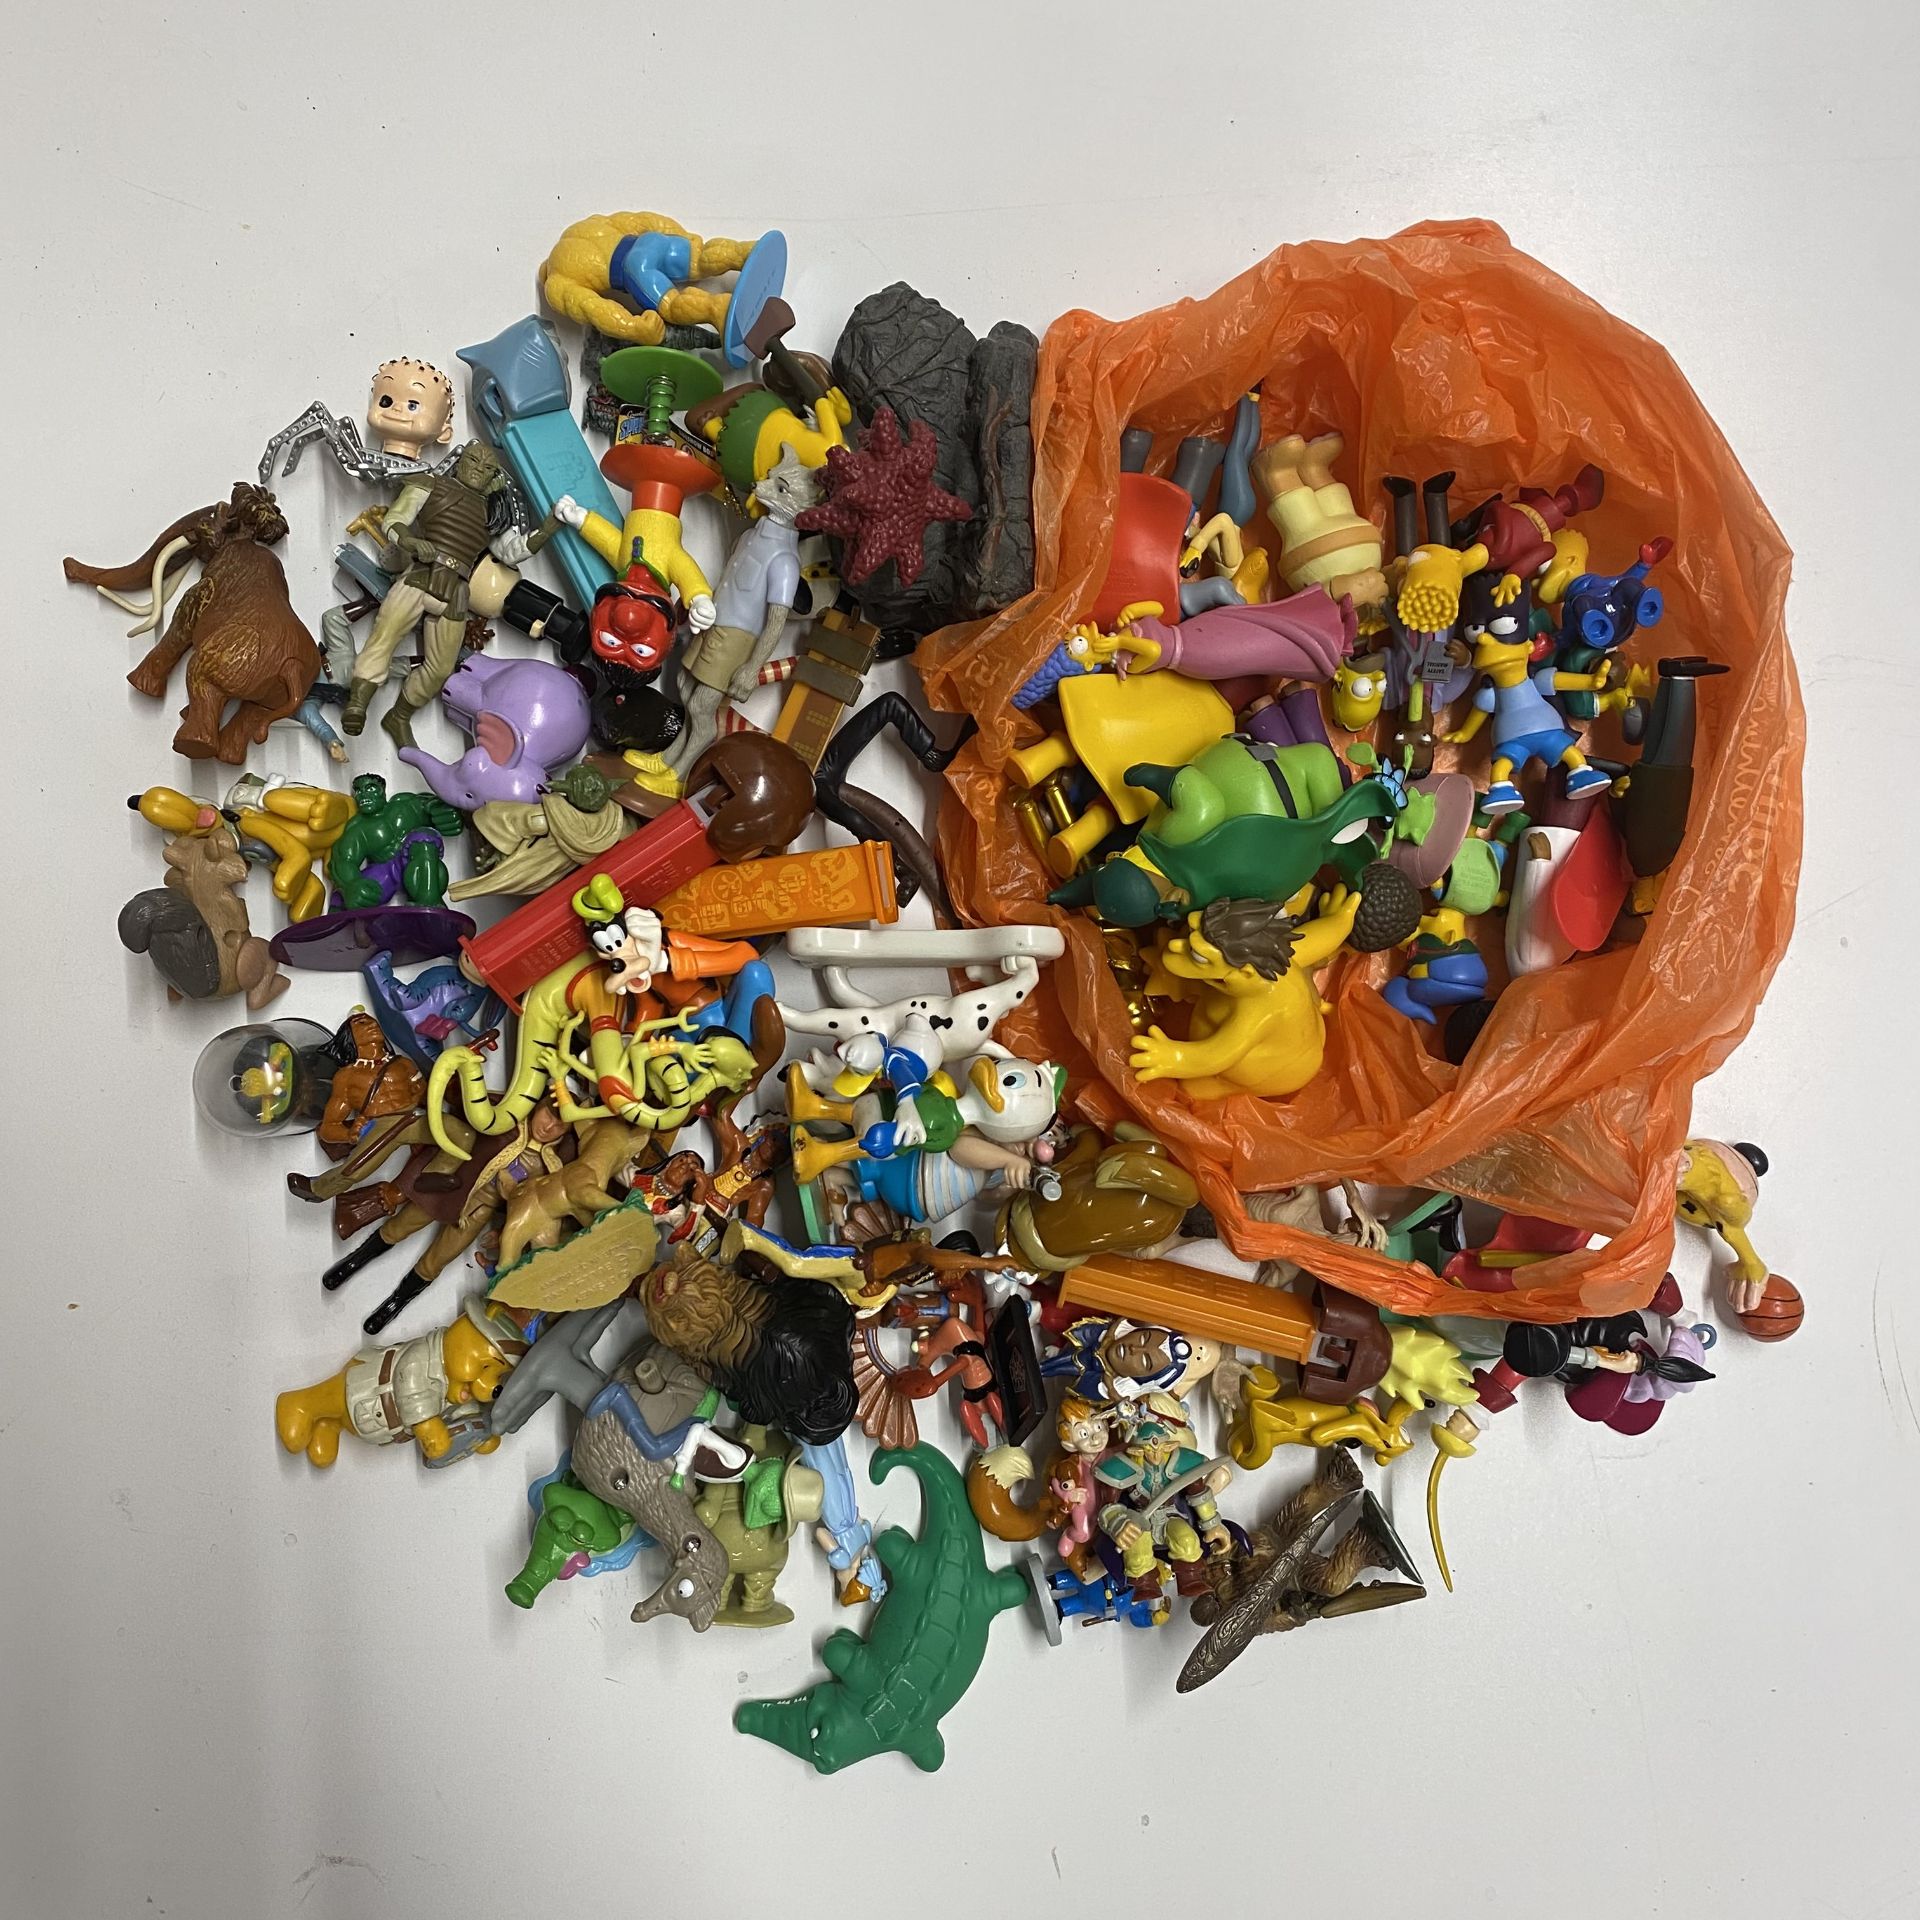 A mixed box of mostly Disney toys.